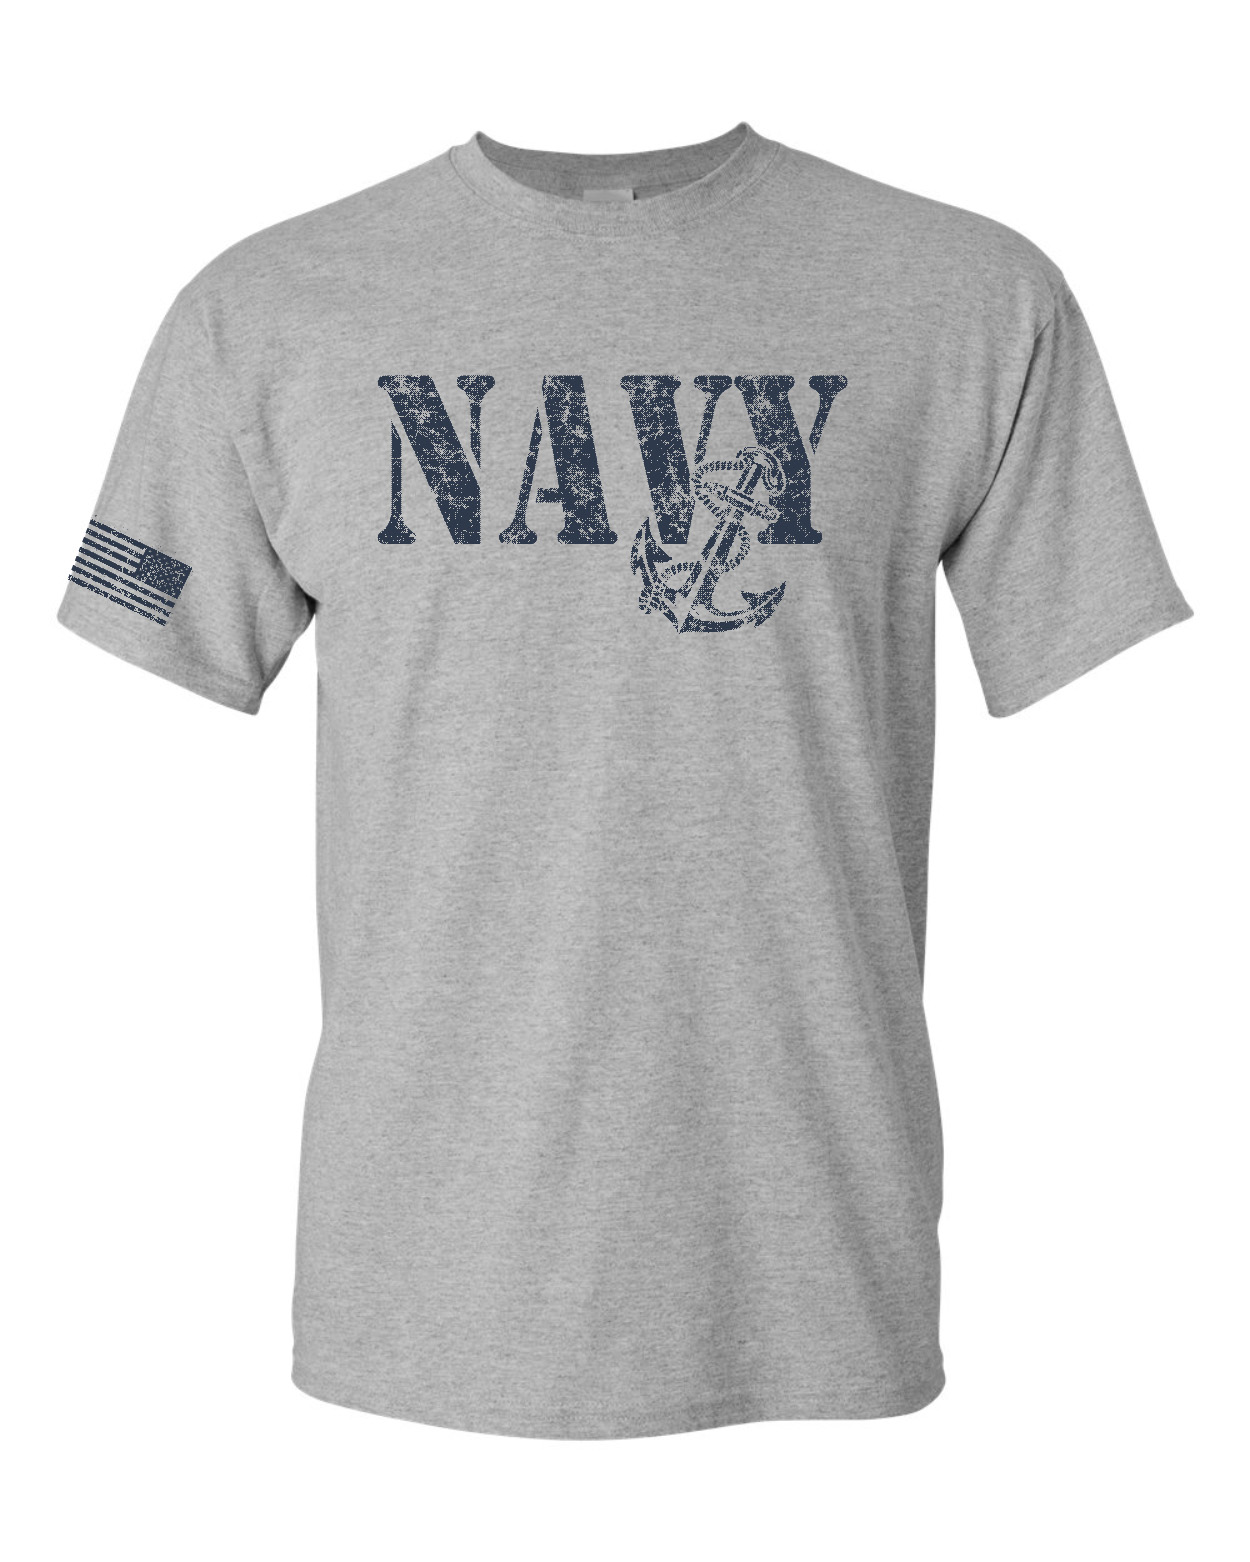 United States Navy Anchor Flag on Sleeve Distressed Men's Tee Shirt ...